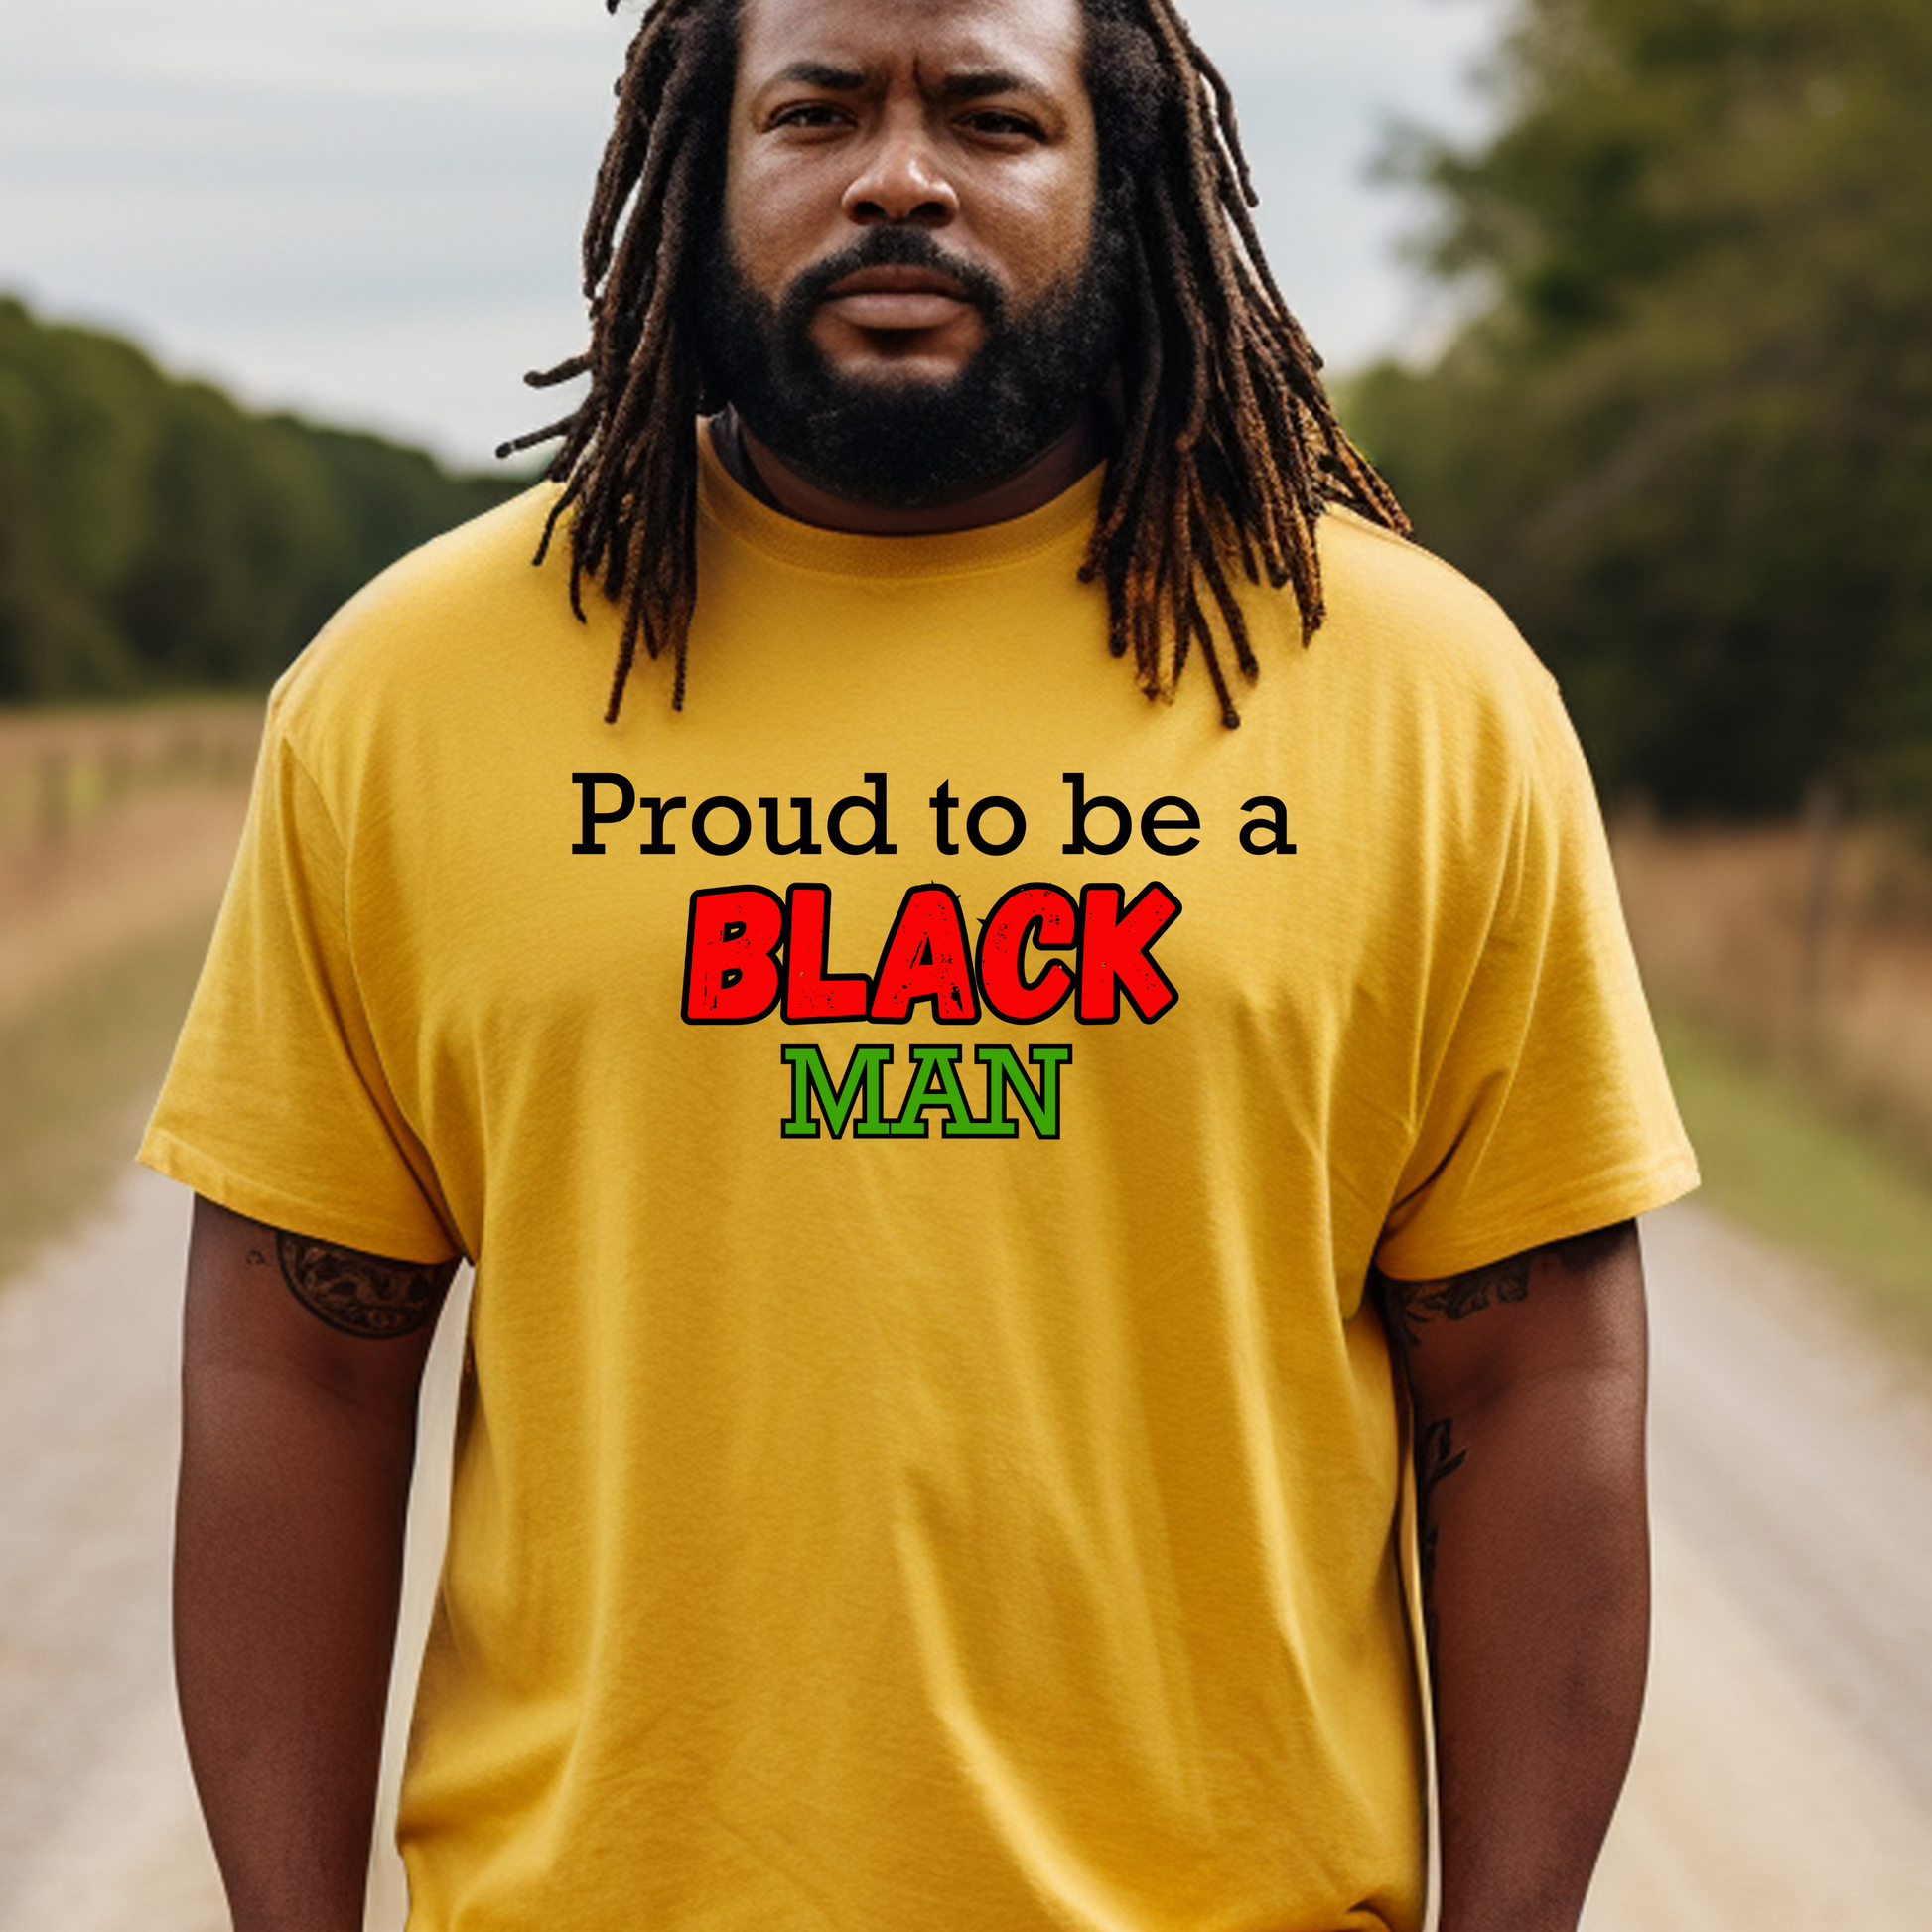 Show your pride with Triumph Tees' Yellow Proud to be a Black Christian Man T-Shirt. Celebrate your identity and faith with this empowering design. Shop now!"